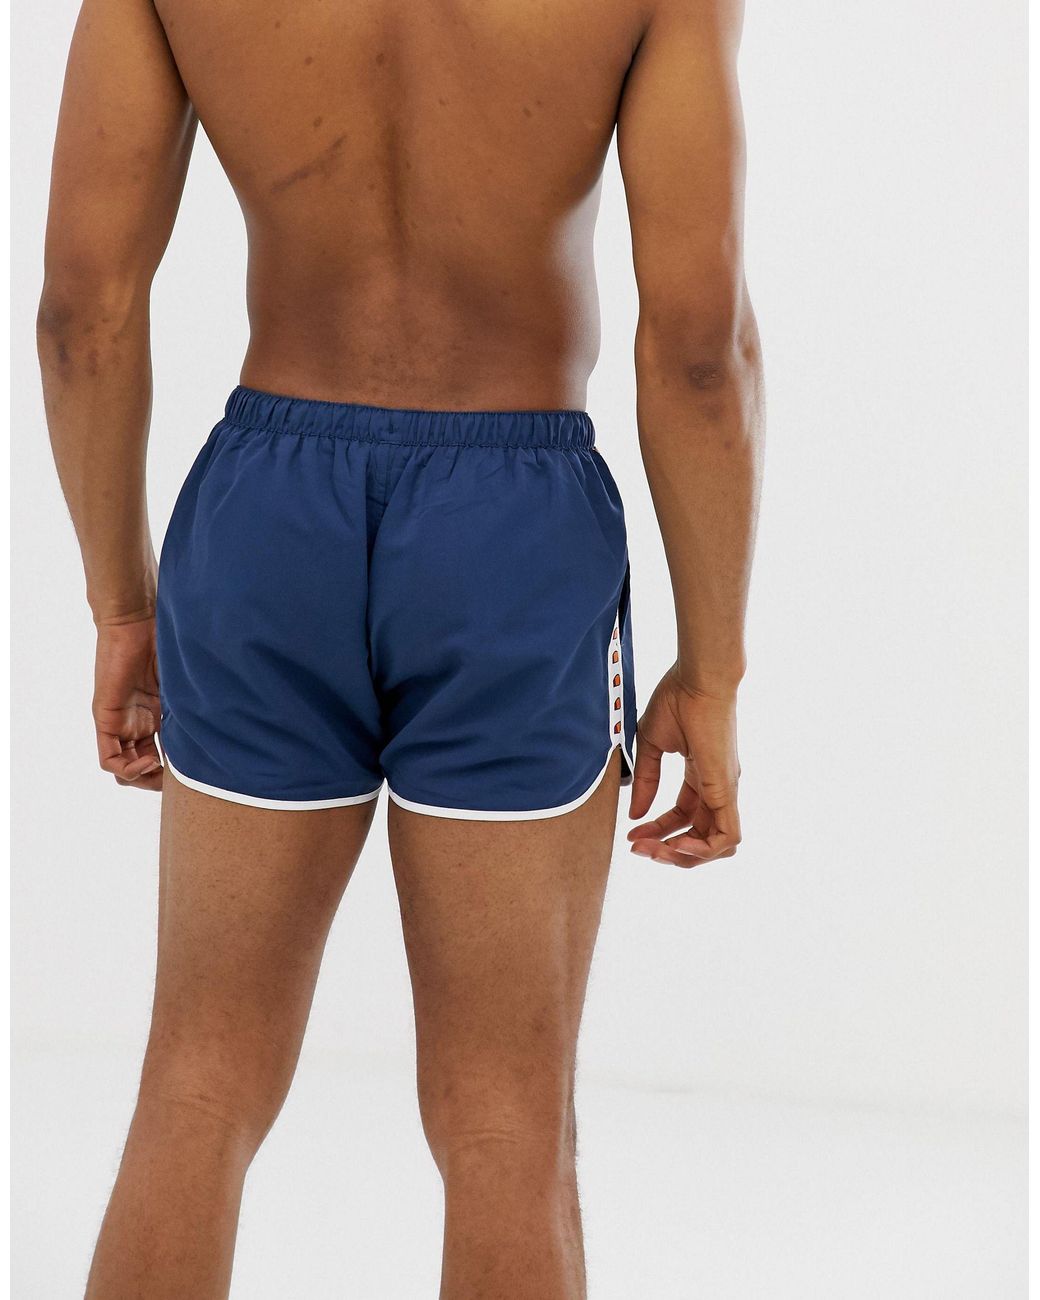 Ellesse Viale Shorts in Blue trunks swimmers beach shorts 